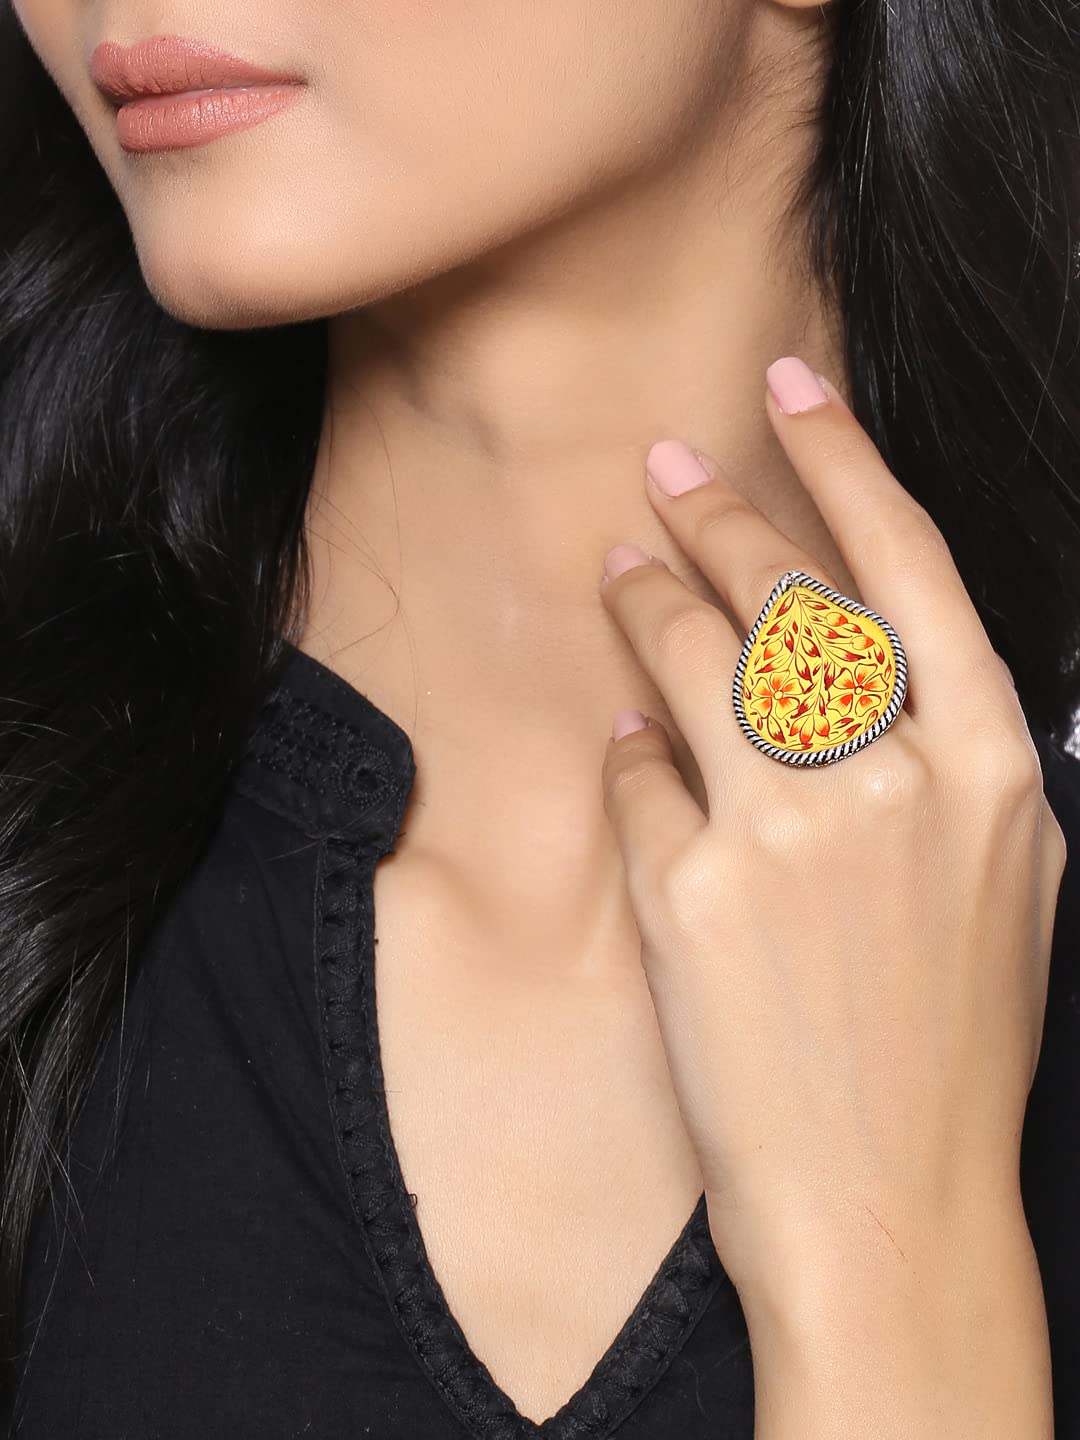 Yellow Chimes Oxidised Rings for Women Multicolor Meenakari Hand Painted Silver Oxidised Ring Adjustable Finger Rings for Women and Girls. (RG 1, Adjustable)